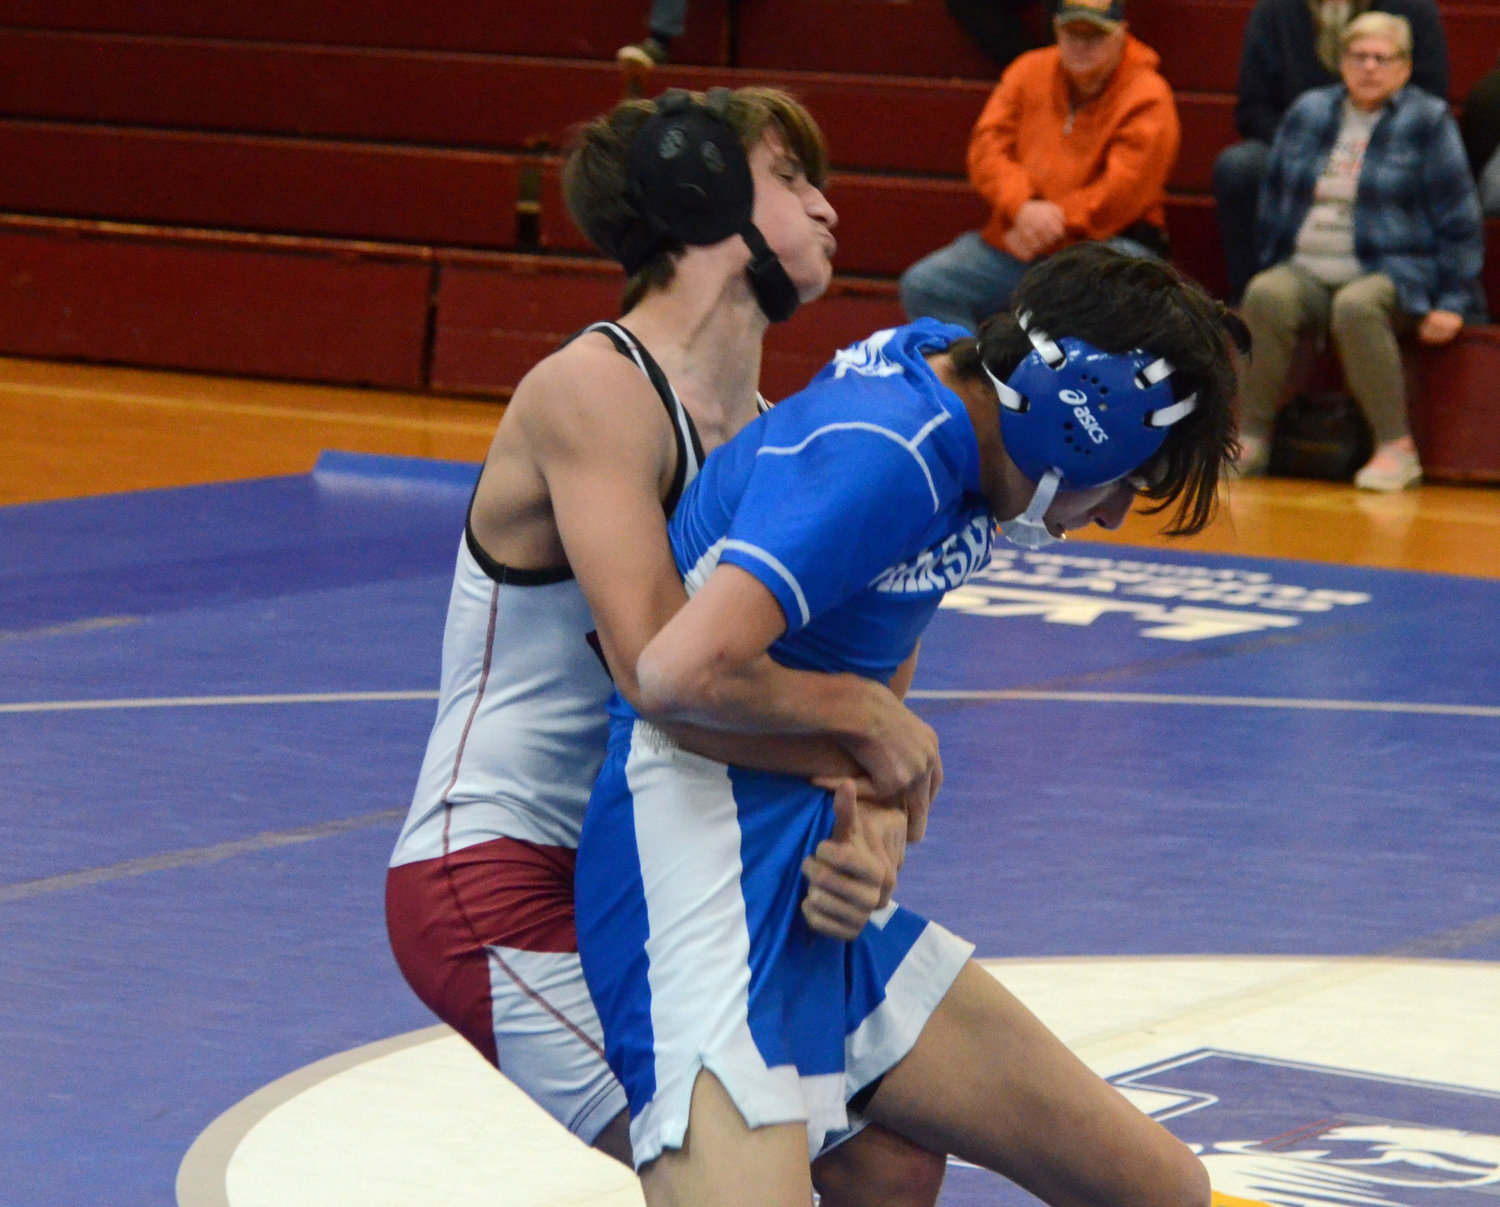 Cornersville’s Joshua Bennett gets a good hold on Marshall County’s Julius Foster in the 106-pound weight class.